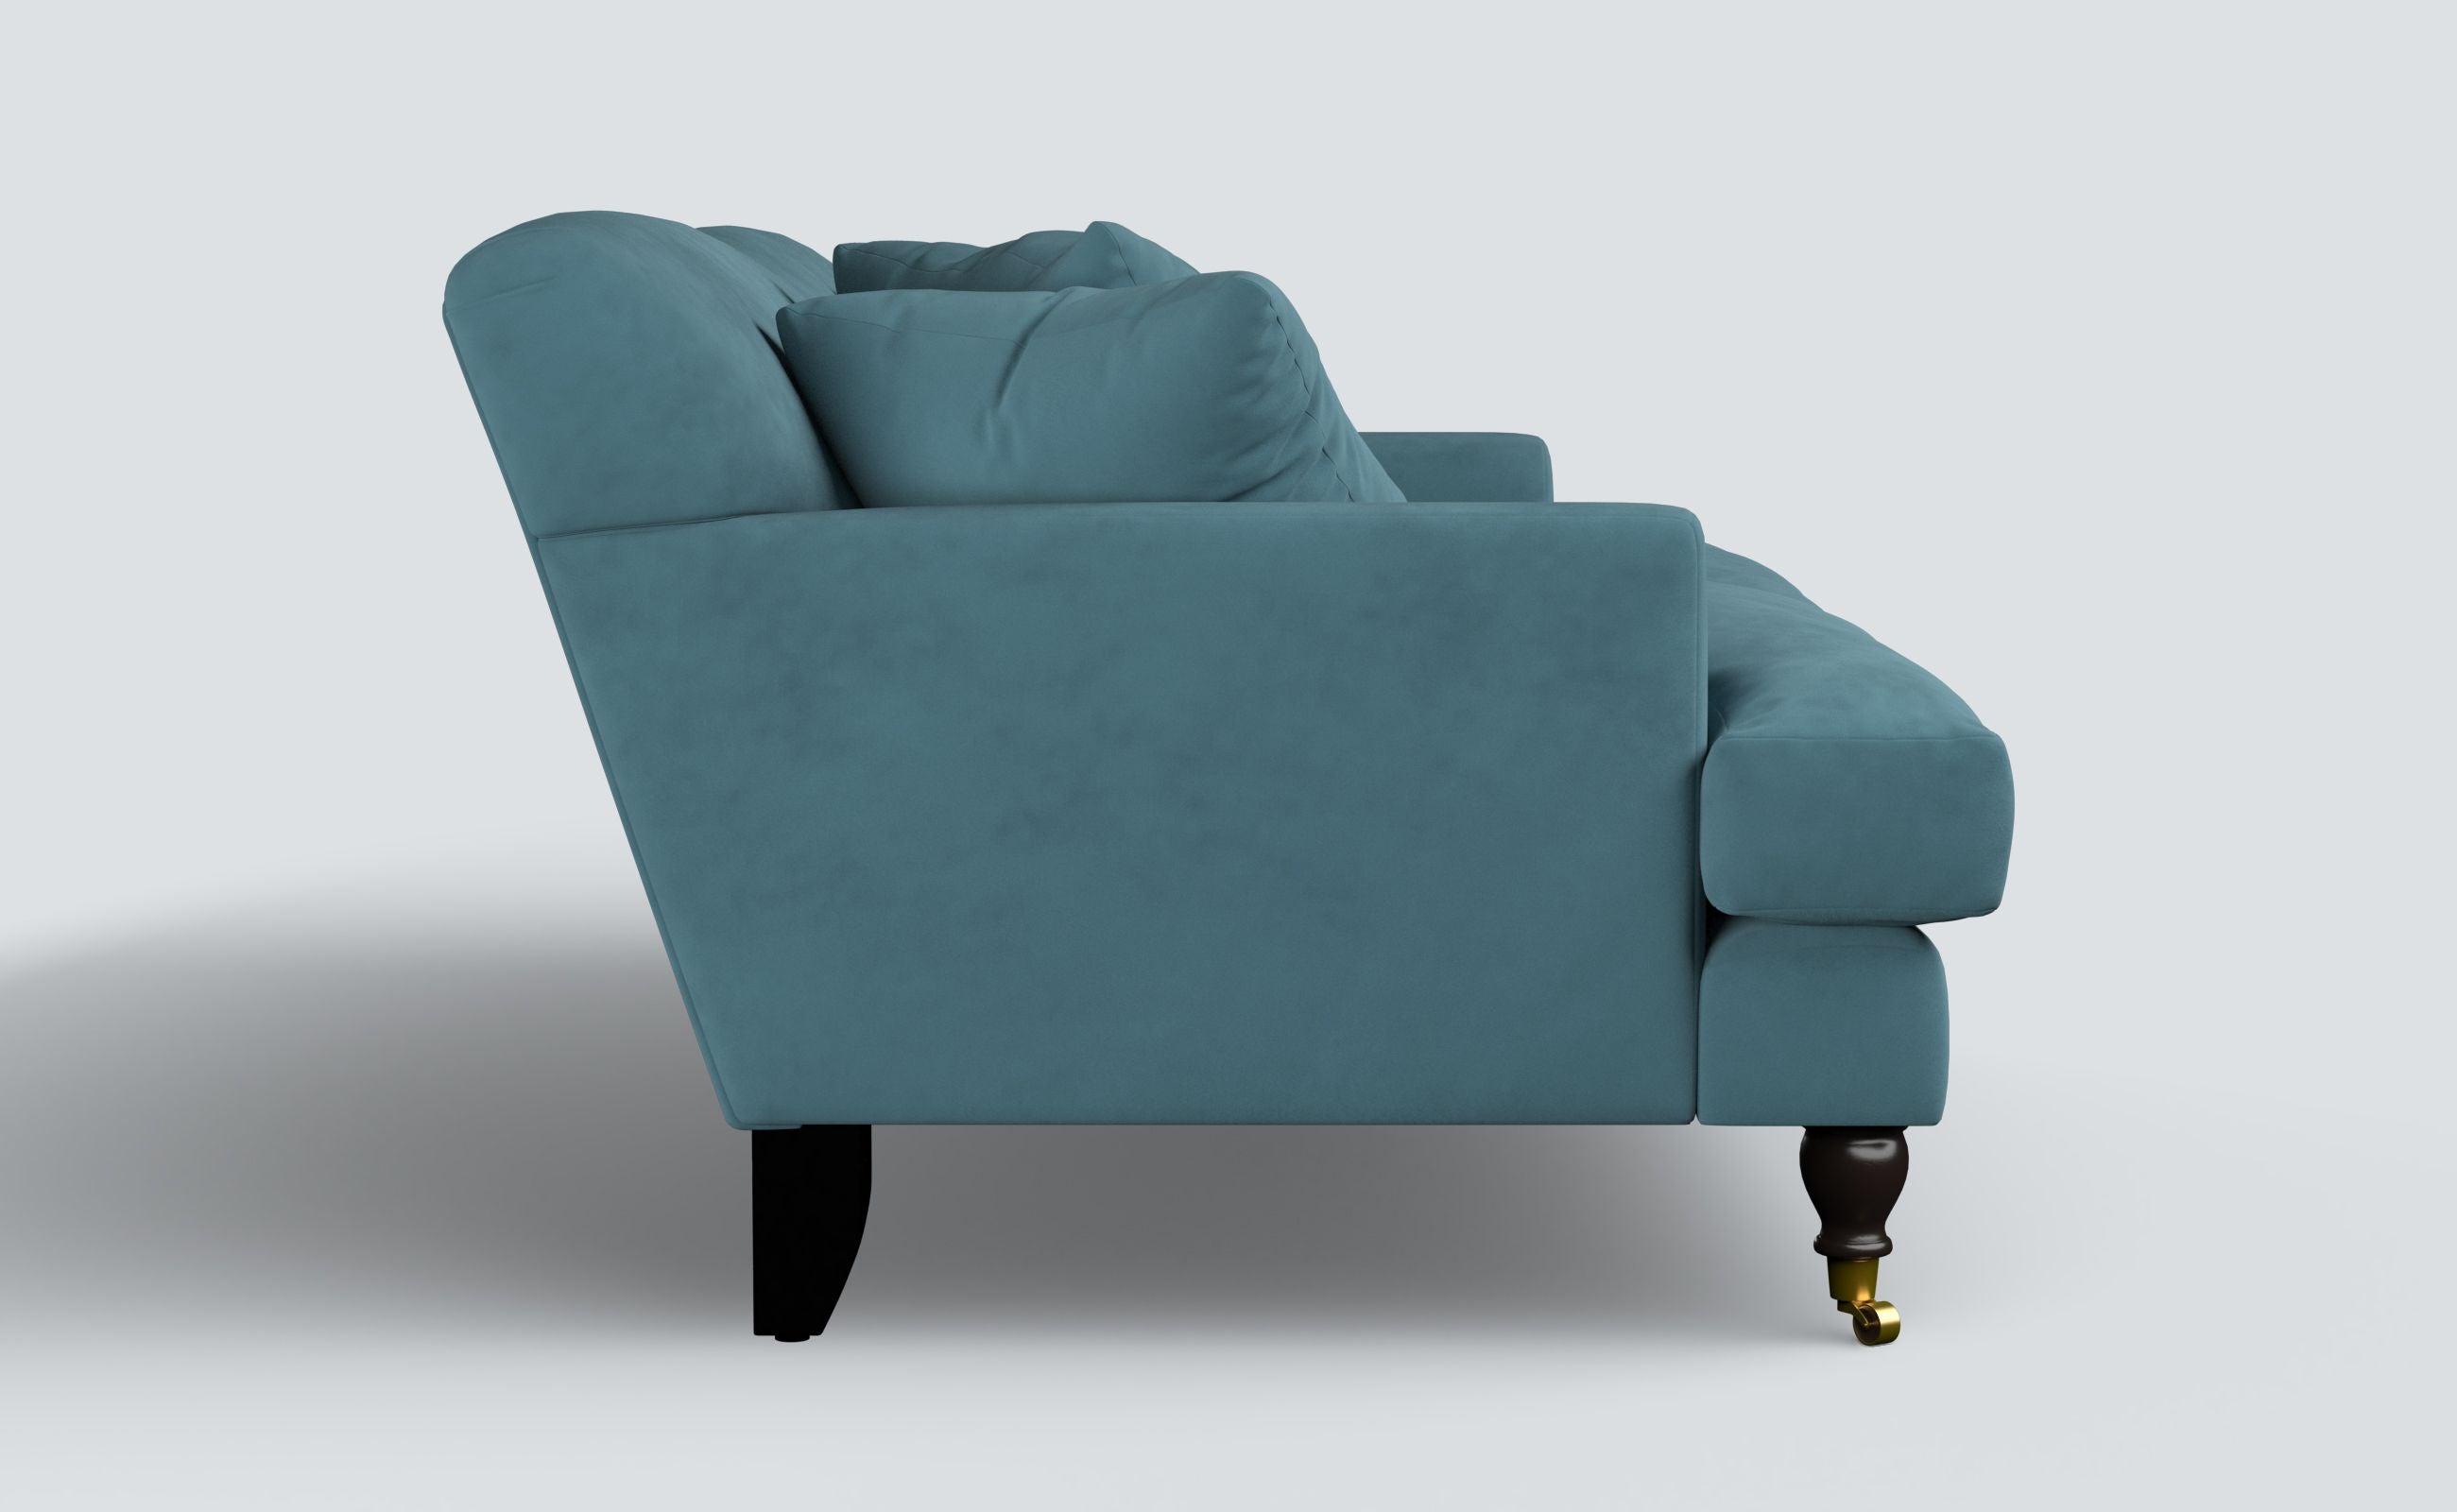 Clio Airforce Blue Stain Guarded Velvet Sofa